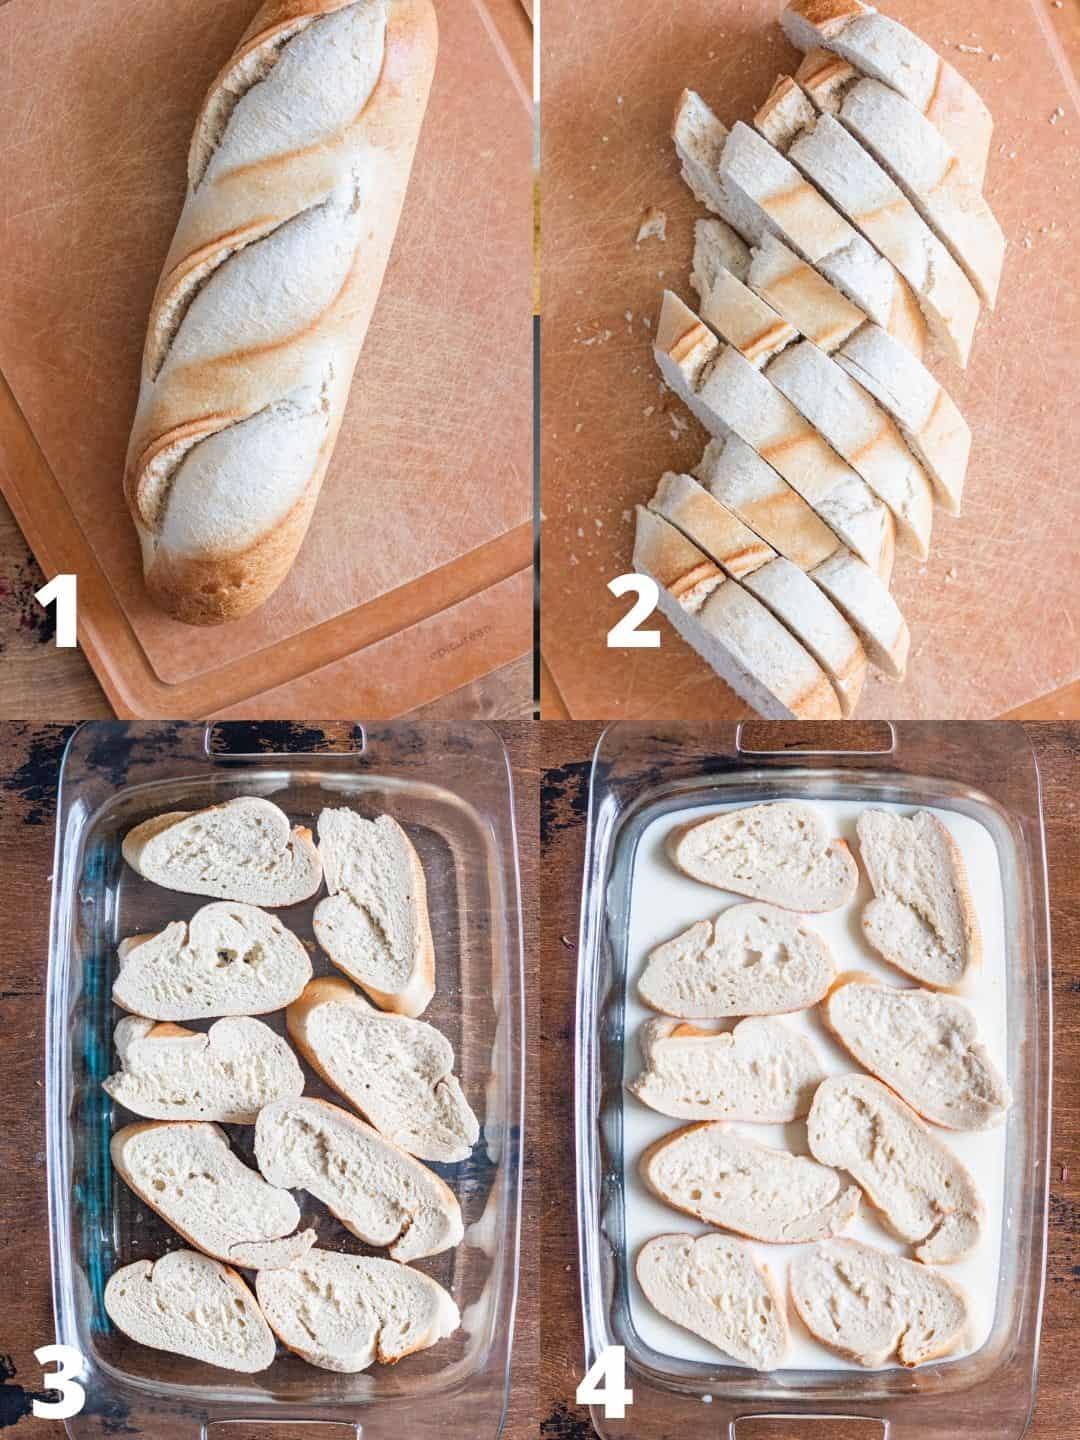 Collage of 4 pictures demonstrating how to slice the bread and soak it in milk before frying in order to make Torrijas.  